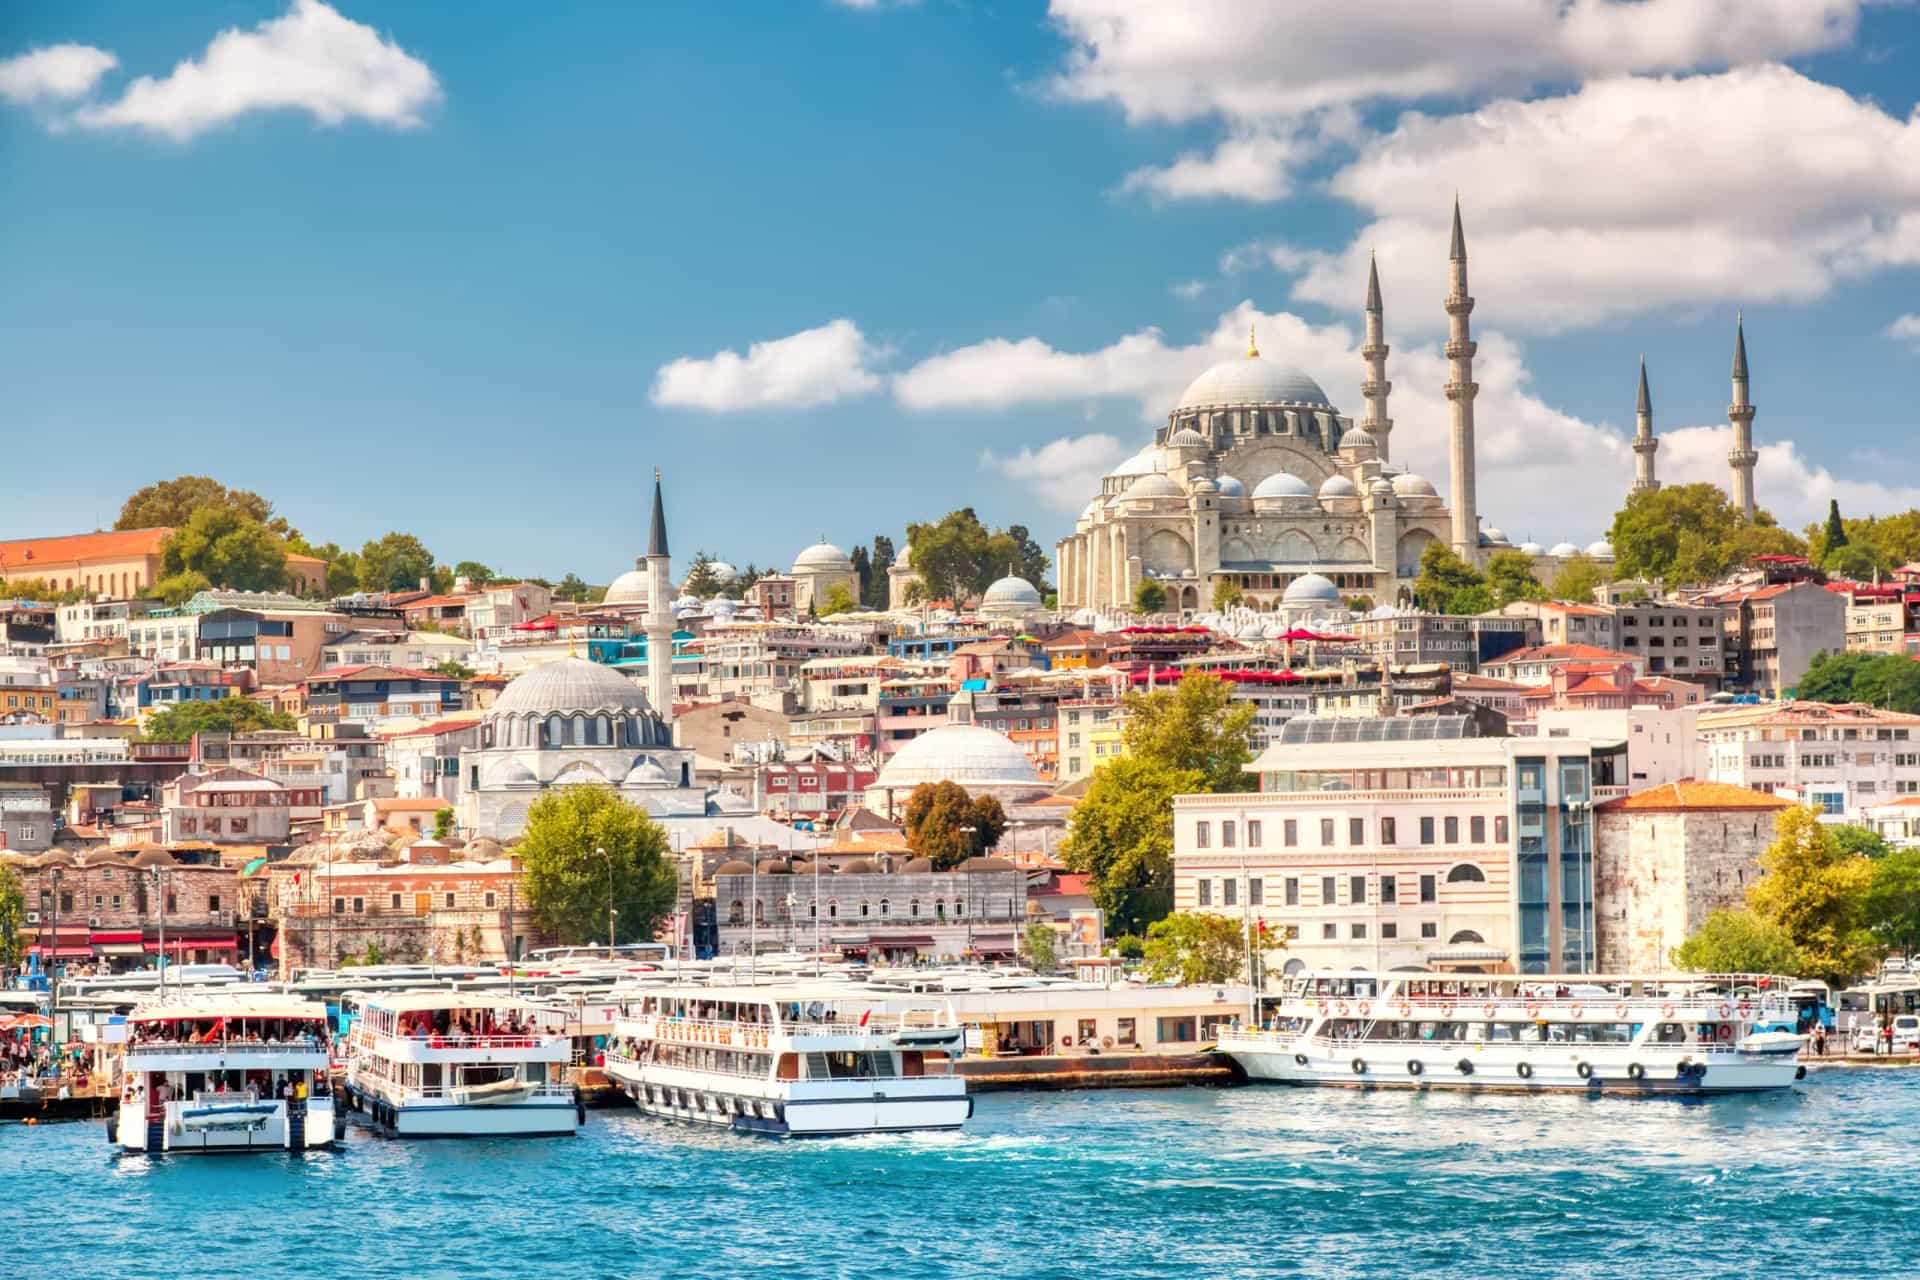 <p>A city break in a place like Istanbul will be a fun and culturally-infused trip. Located between two continents, Europe and Asia, this city offers plenty of history and a rich cuisine.</p>